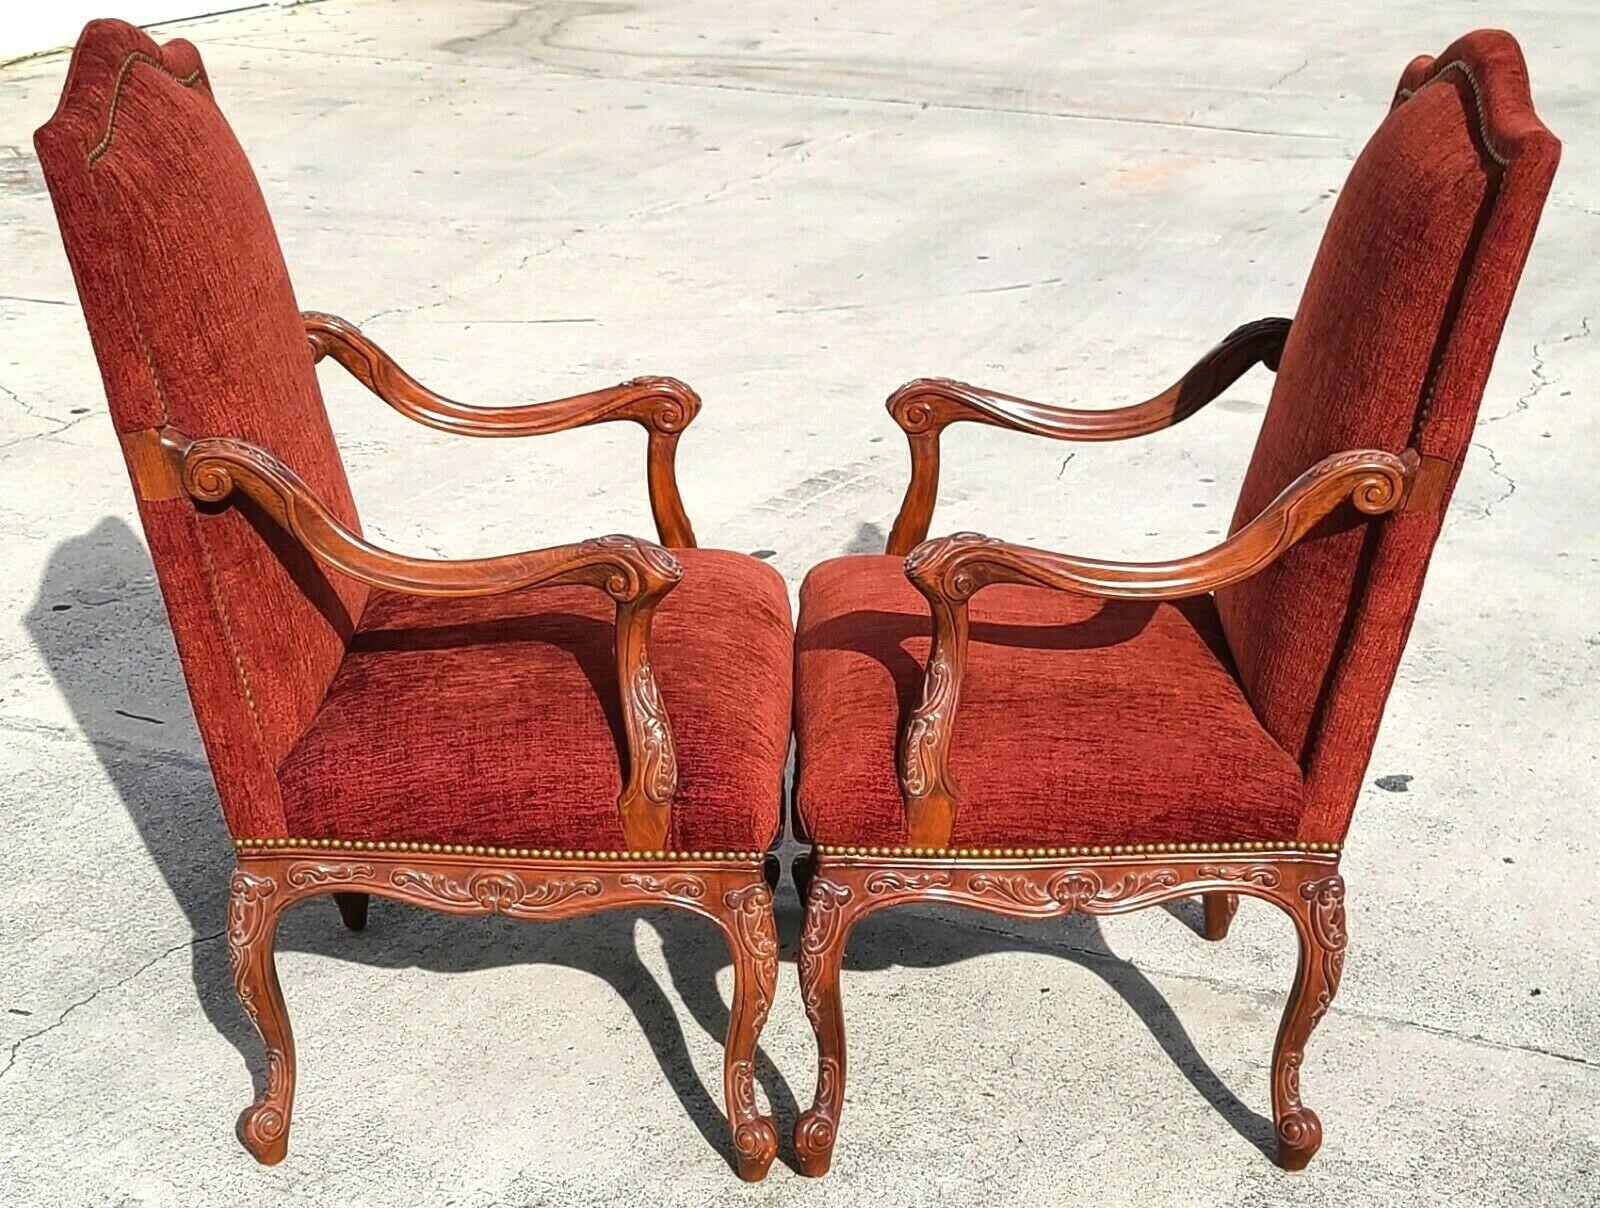 Offering One Of Our Recent Palm Beach Estate Fine Furniture Acquisitions Of A
Pair of Antique French Louis XV Stately armchairs
Featuring hand-carved details and French brass nail trim.

Approximate Measurements in Inches
46